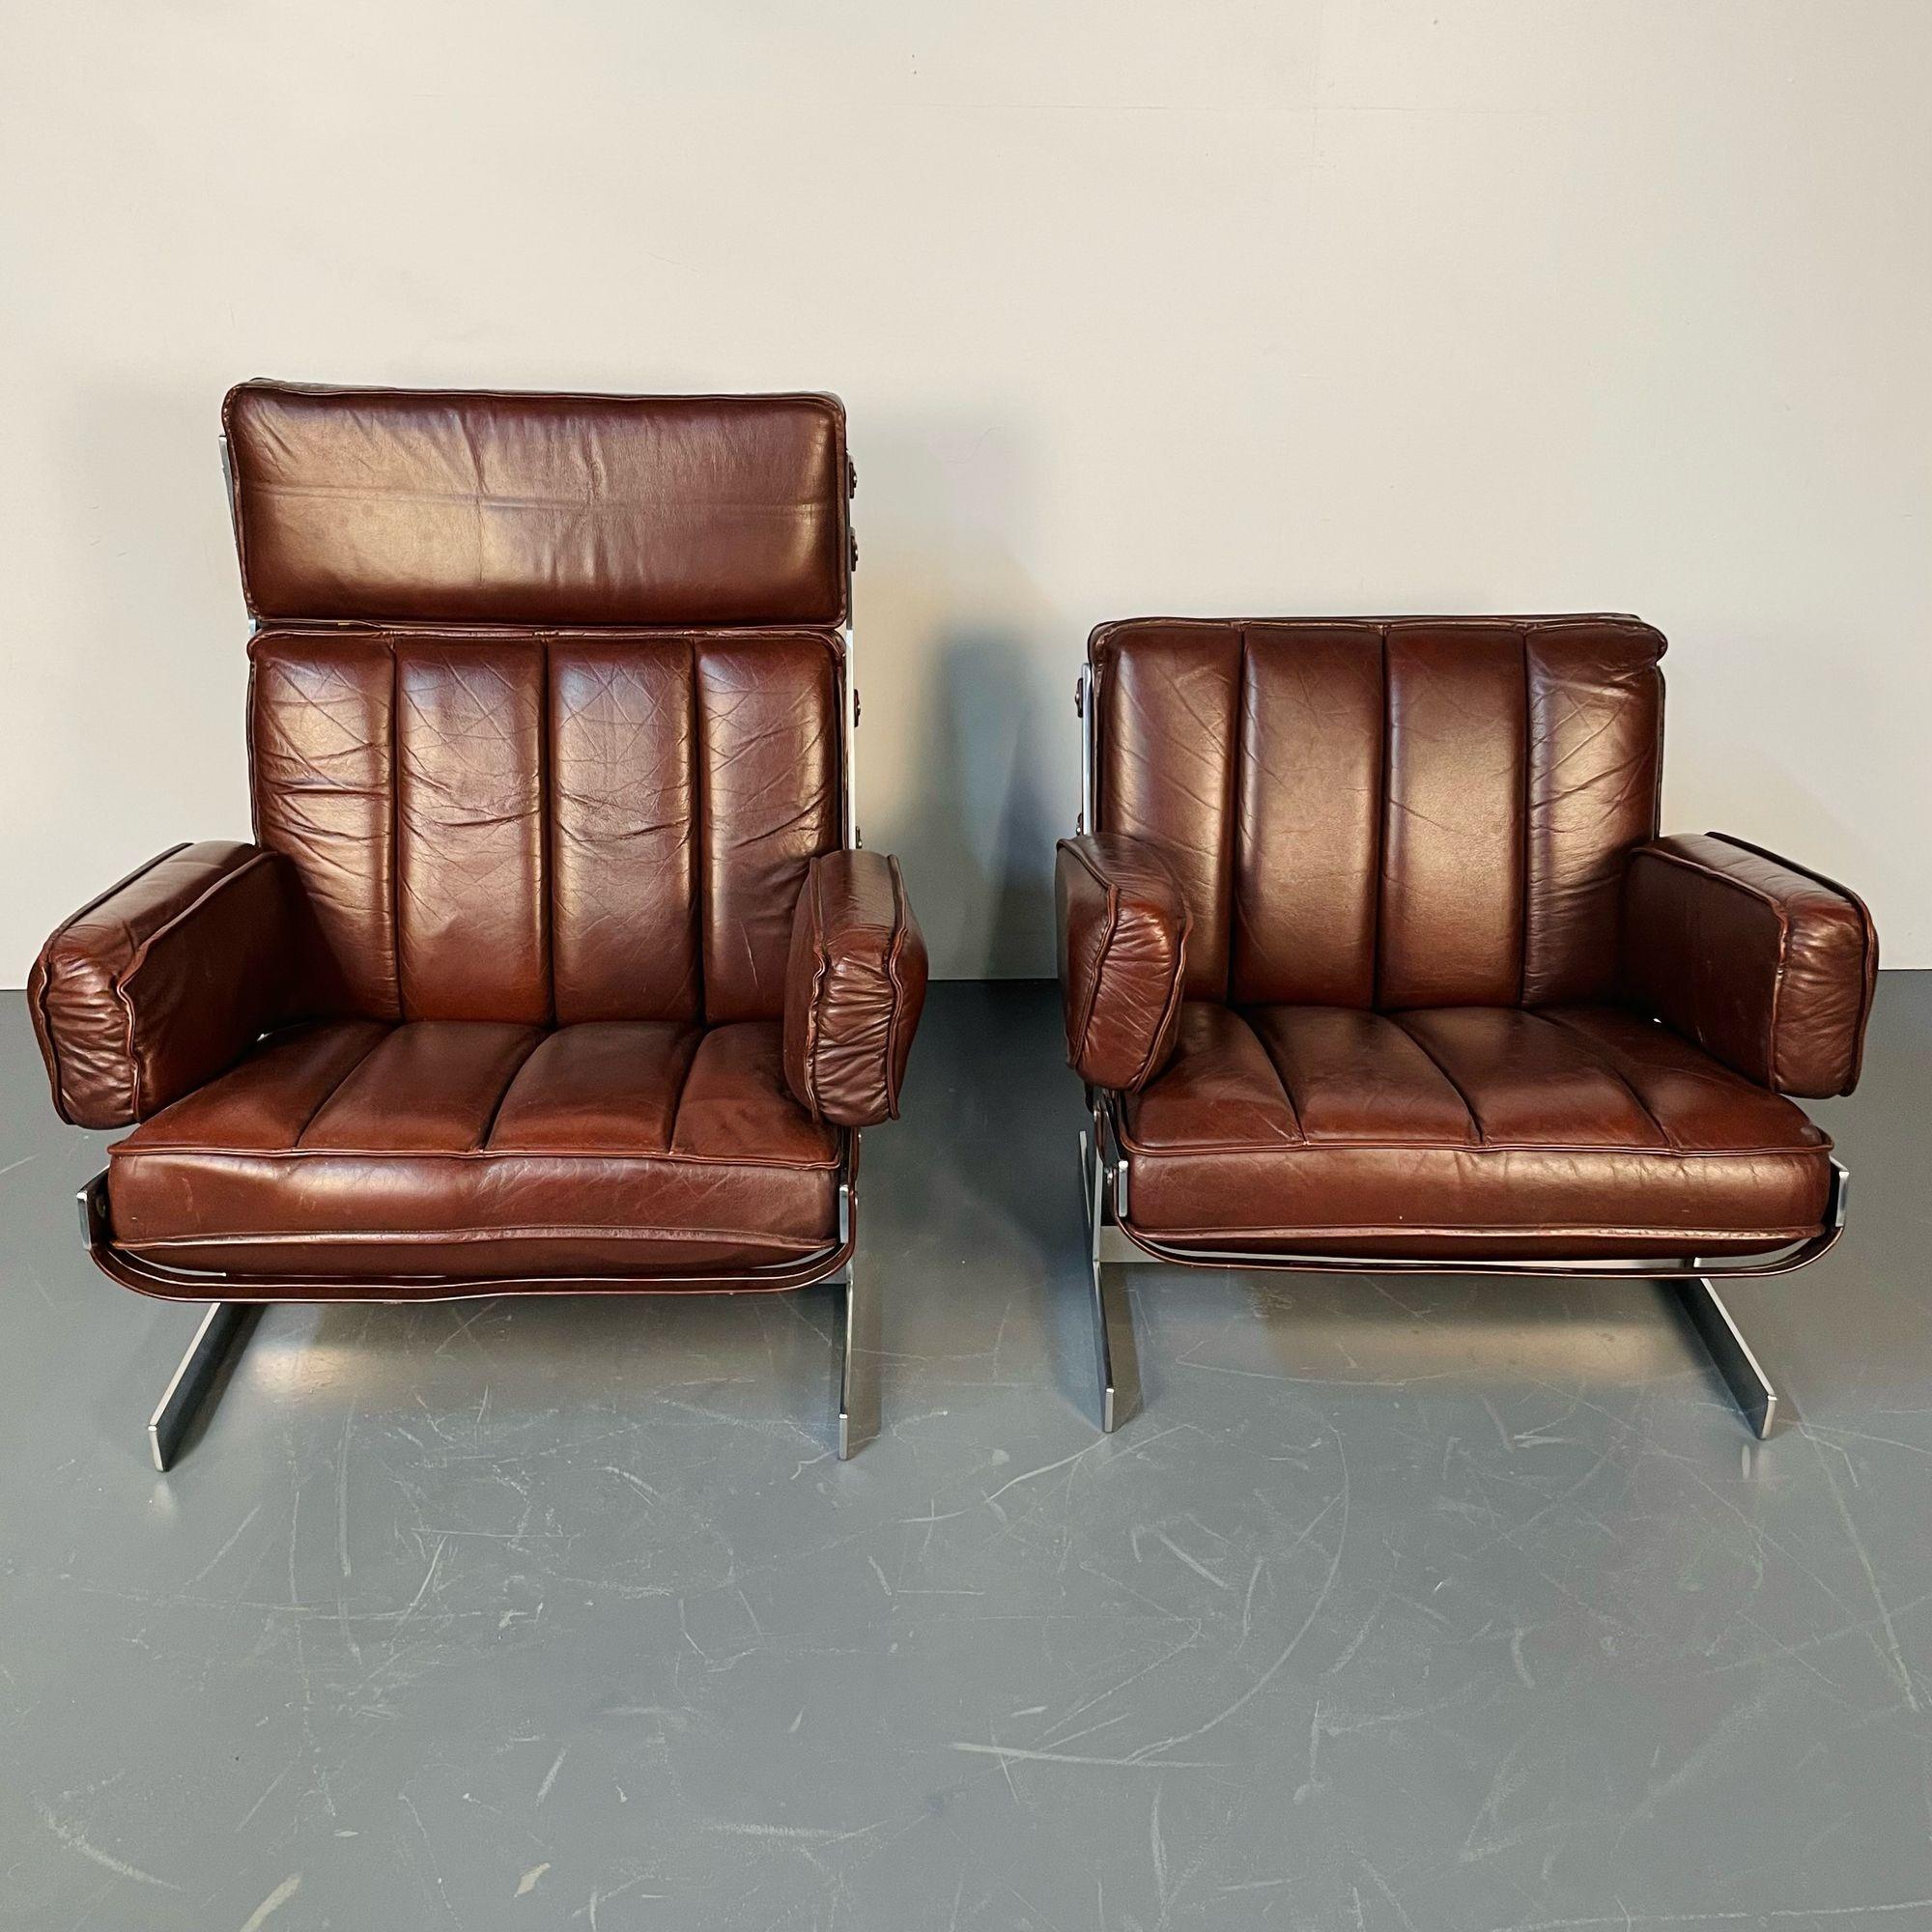 Arne Norell, Swedish Mid-Century Modern Lounge Chairs, Leather, Steel, 1960s For Sale 3